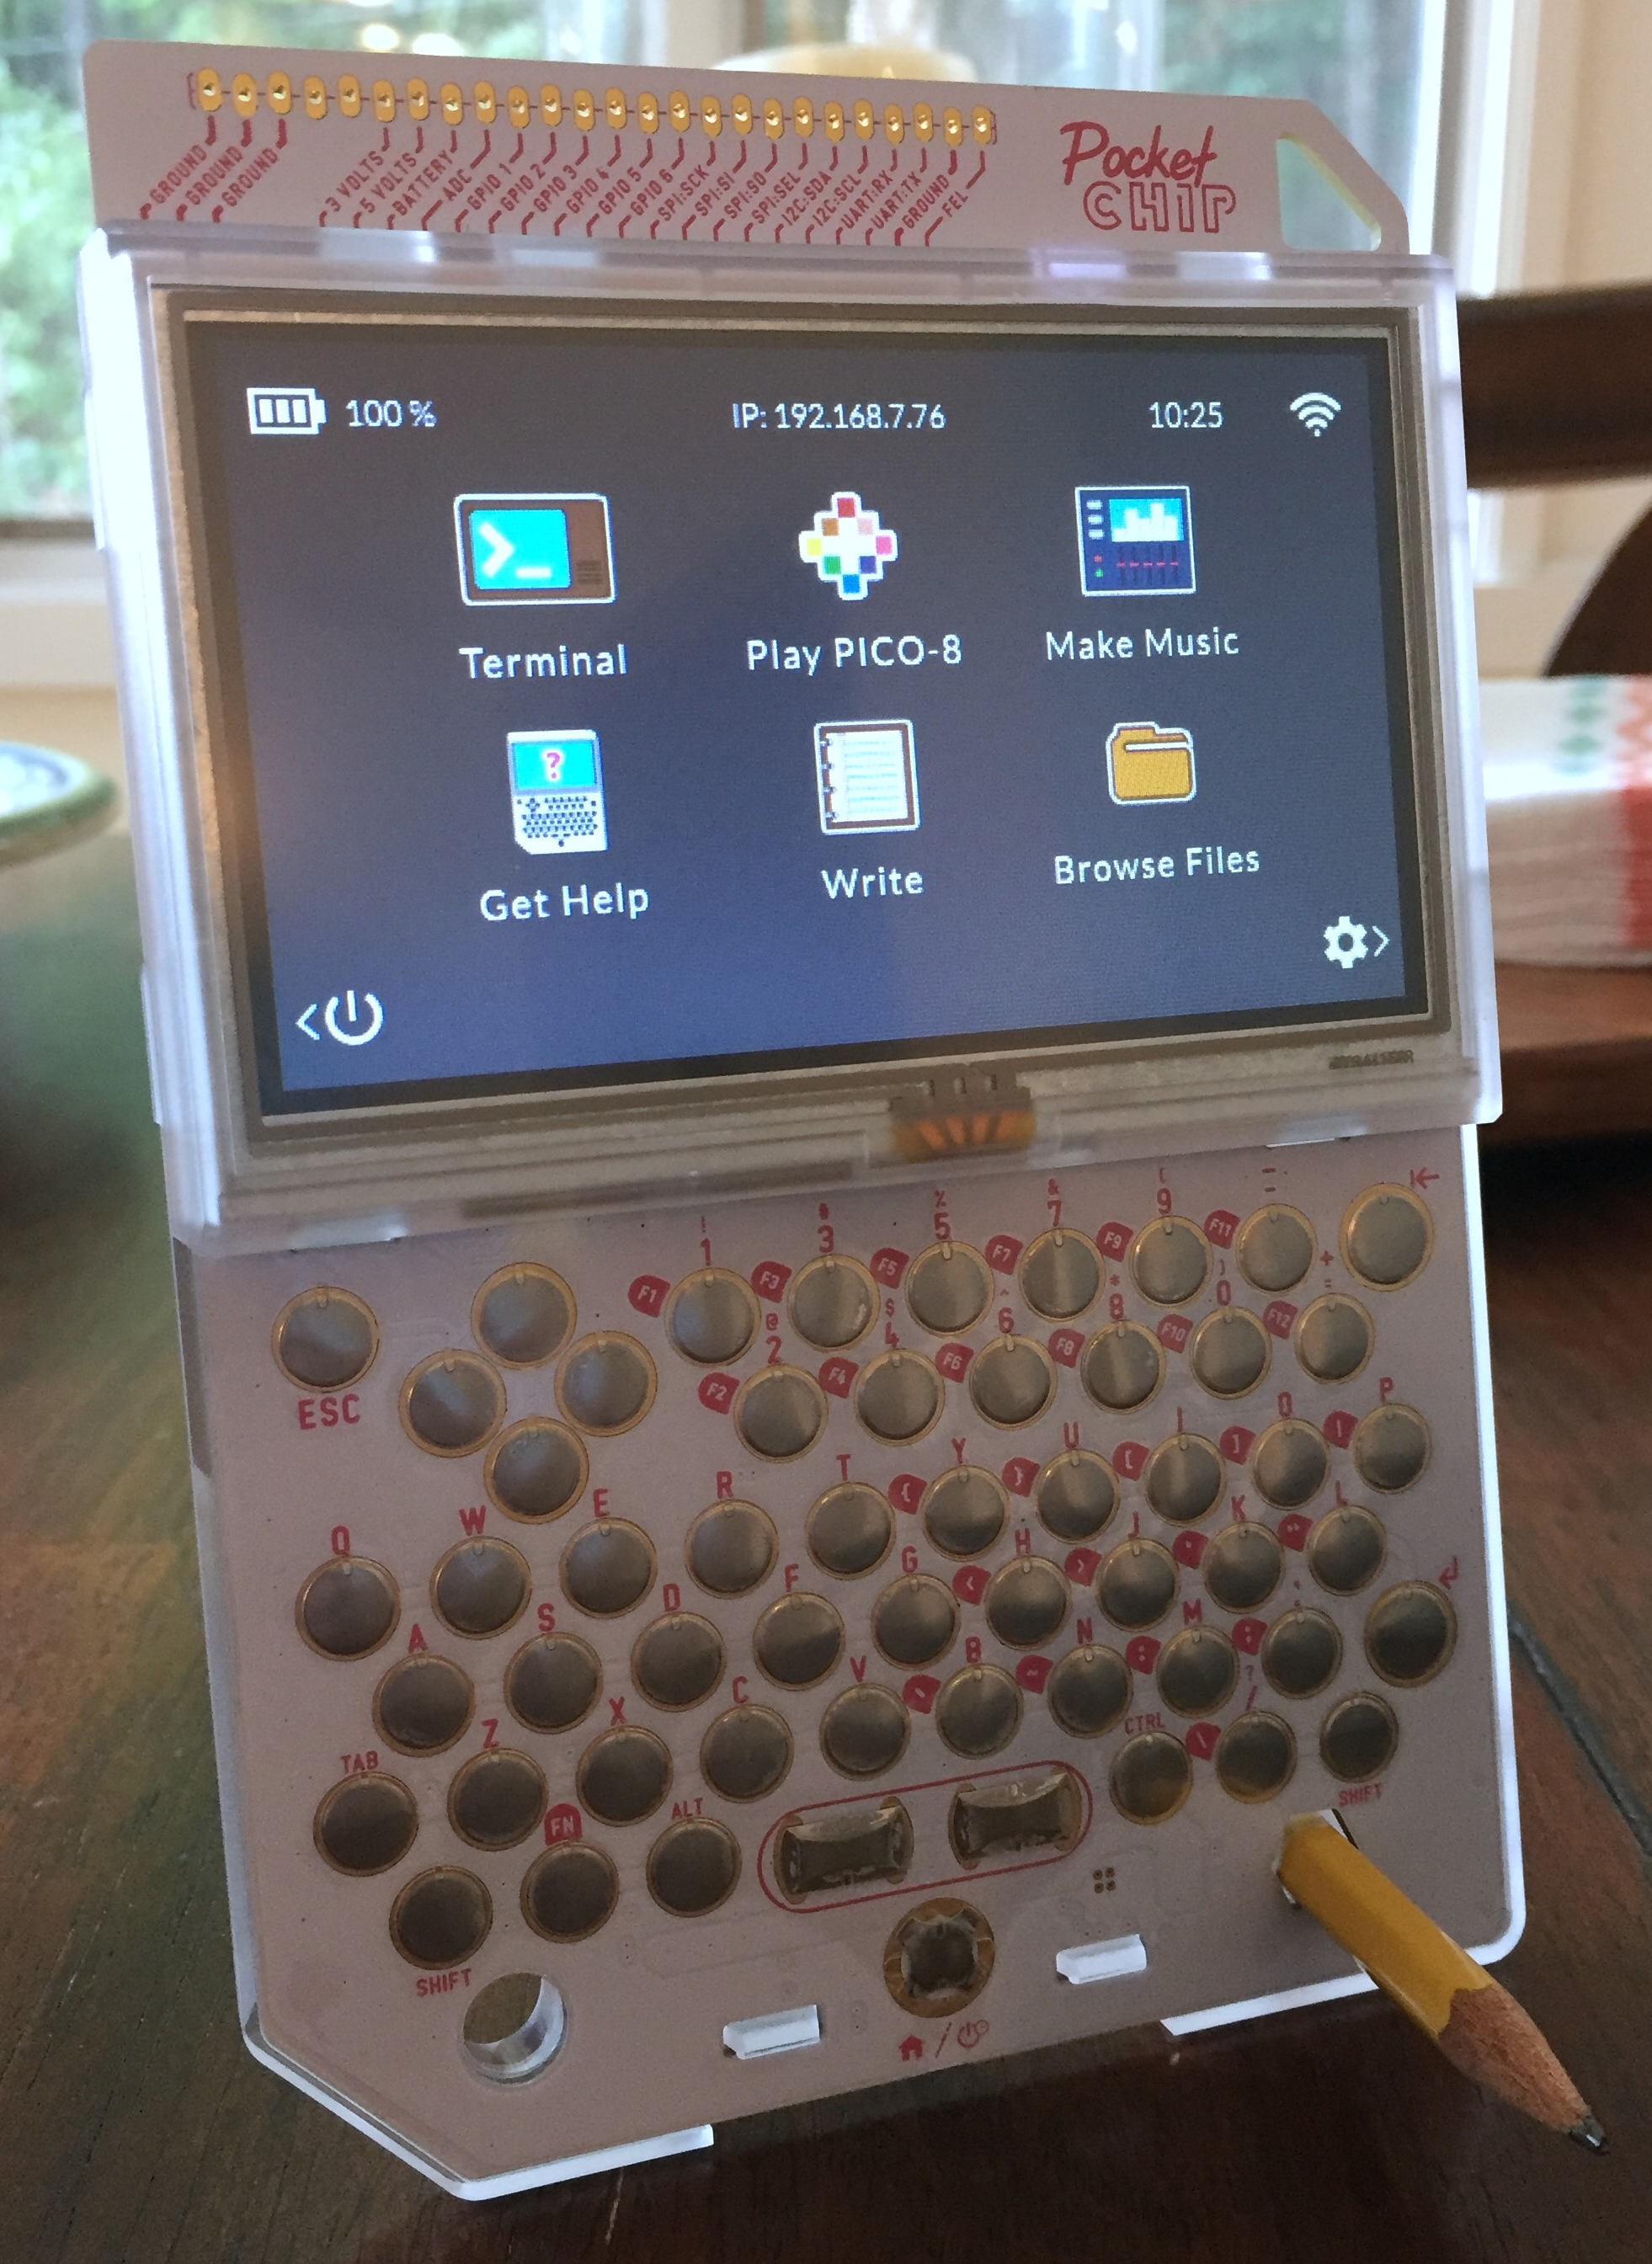 The front of the Pocket CHIP